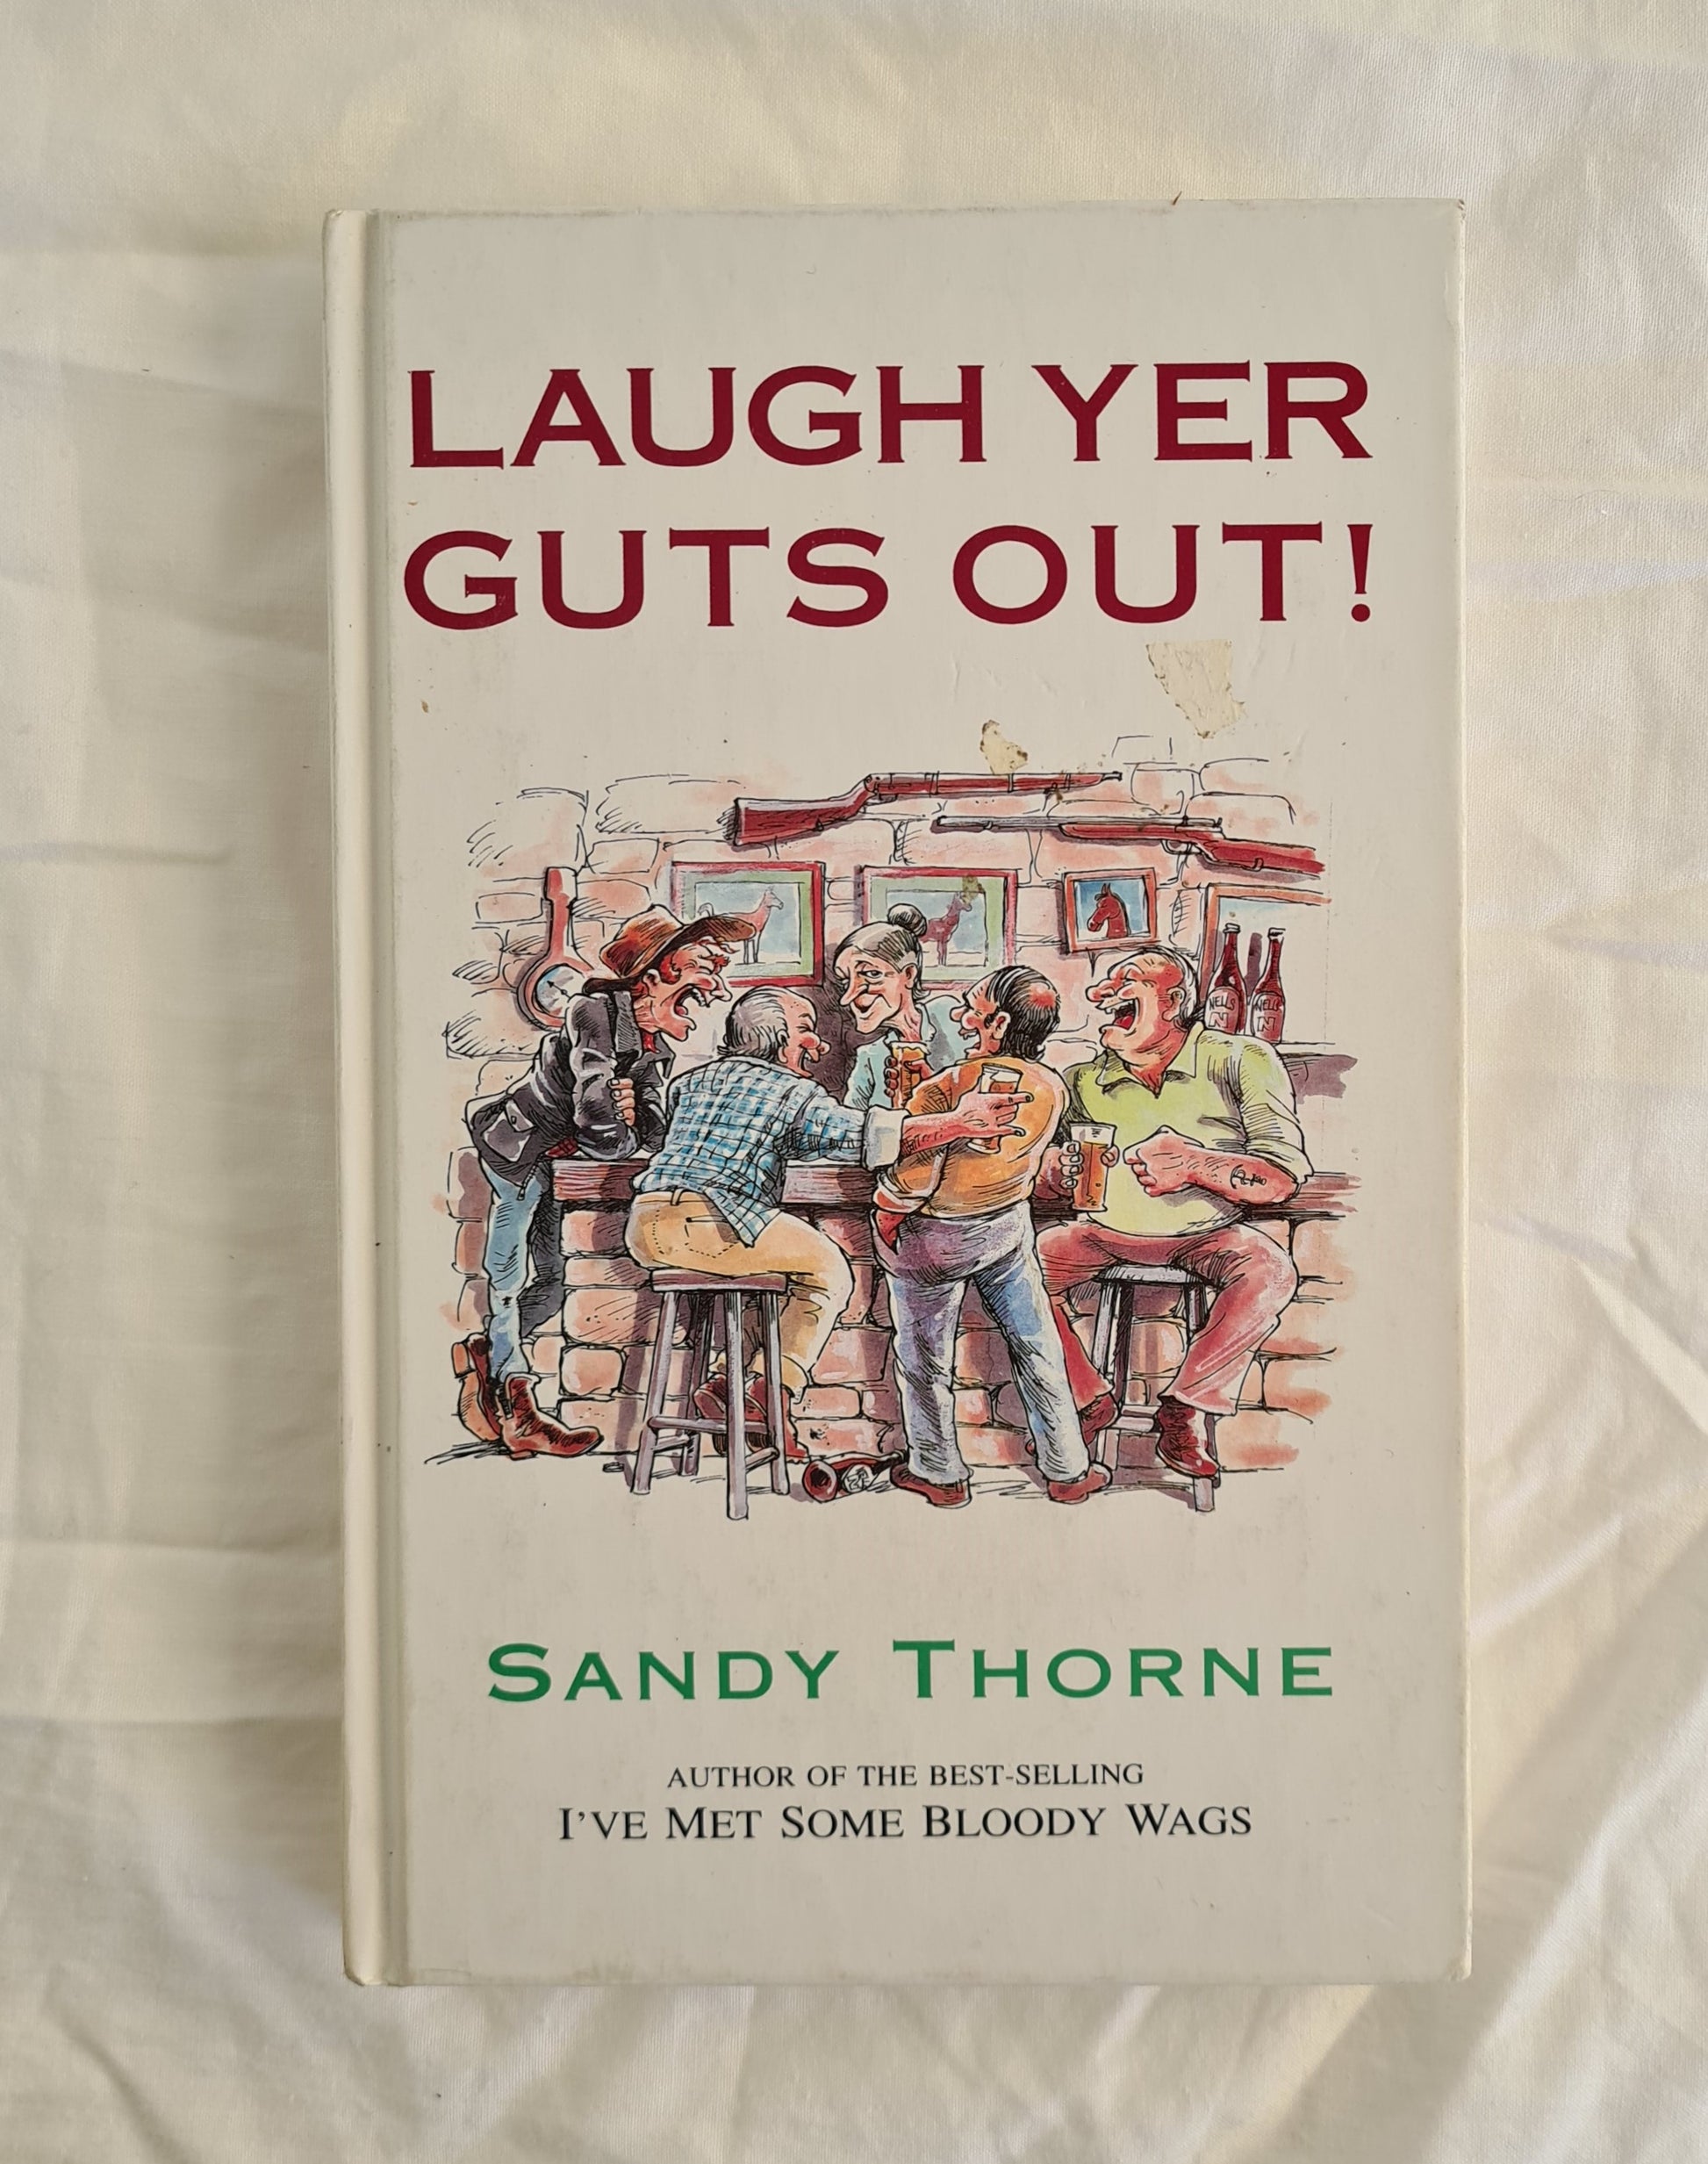 Laugh Yer Guts Out!  by Sandy Thorne  illustrated by John Draper